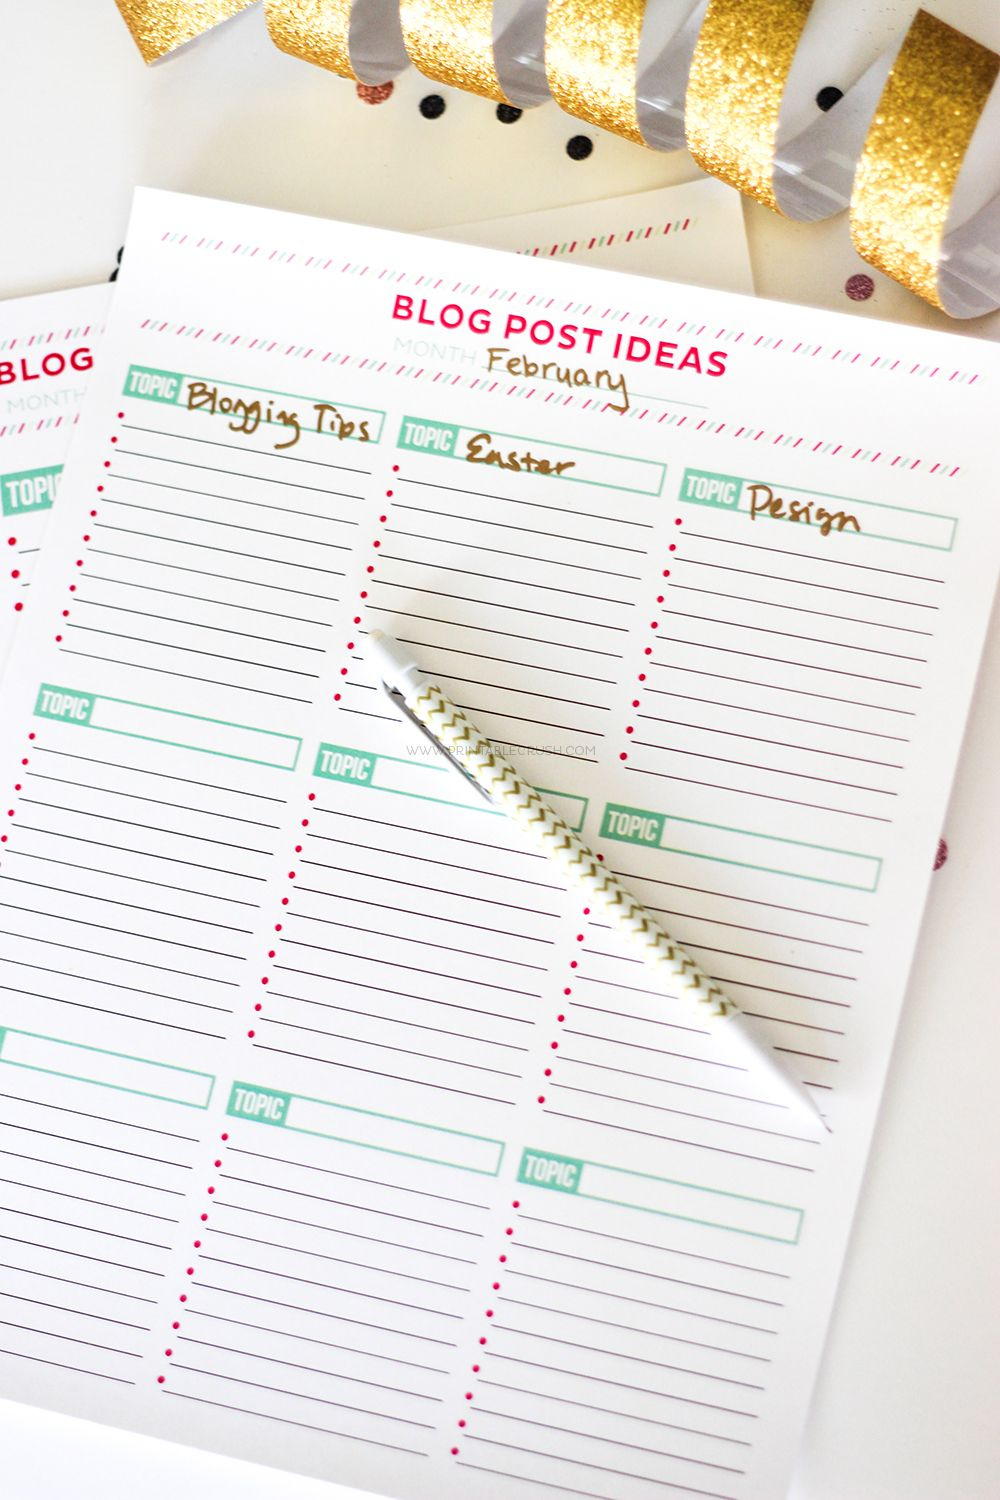 Brainstorm Blog Post Ideas With This Free Printable Worksheet | Blog | Blog Worksheet Printable